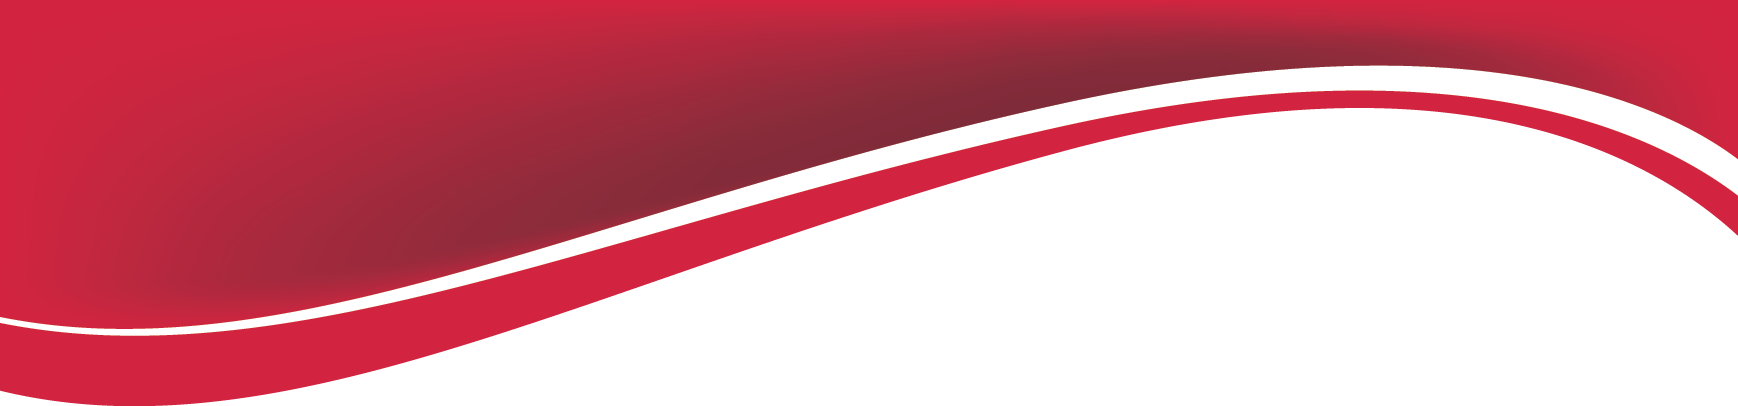 Download PNG image - Red Wave PNG Image 